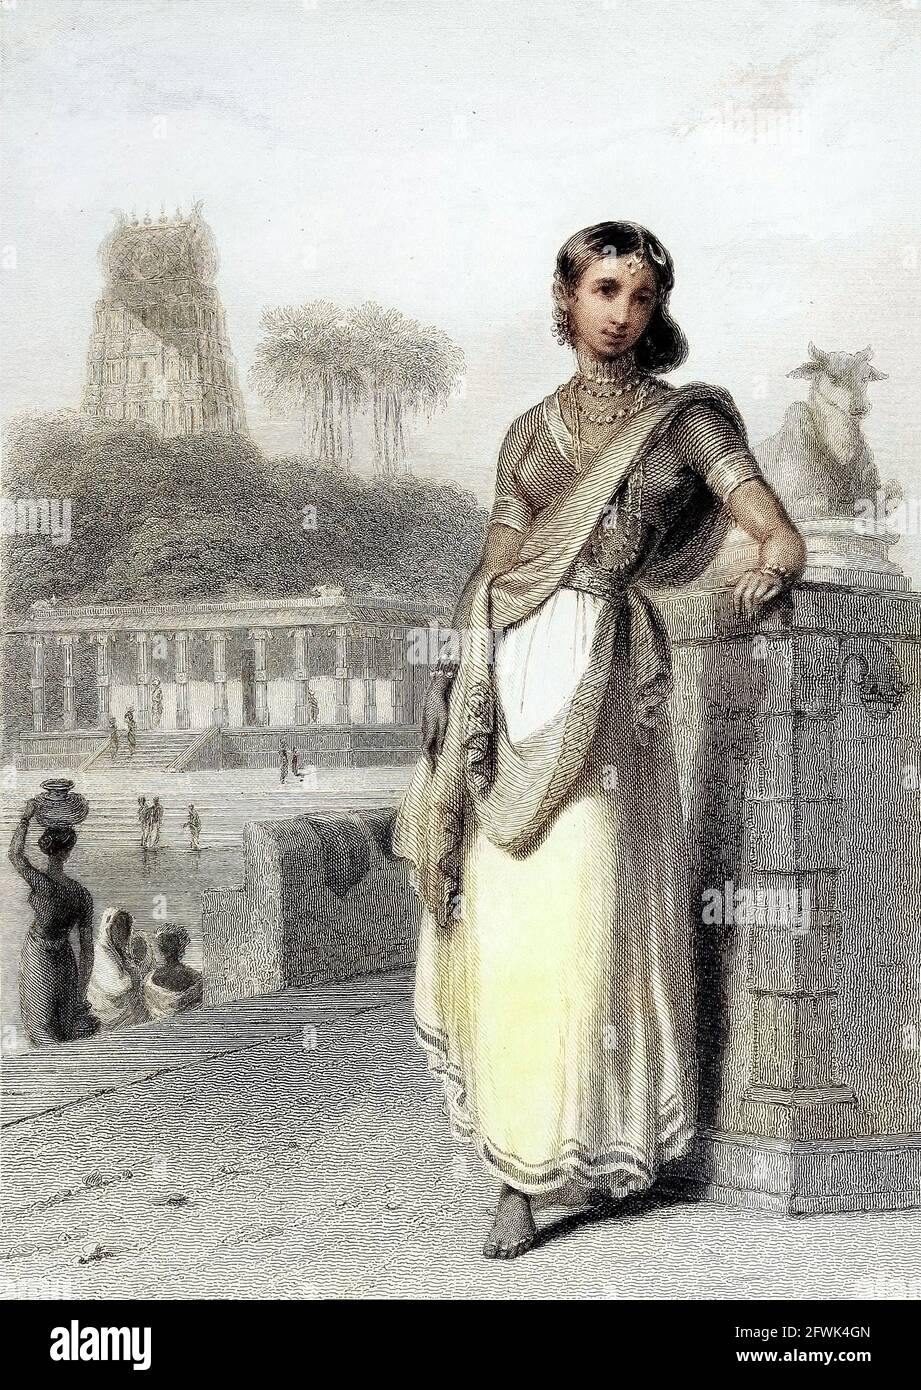 A Hindoo [Hindu] Woman From the book ' The Oriental annual, or, Scenes in India ' by the Rev. Hobart Caunter Published by Edward Bull, London 1836 engravings from drawings by William Daniell Stock Photo